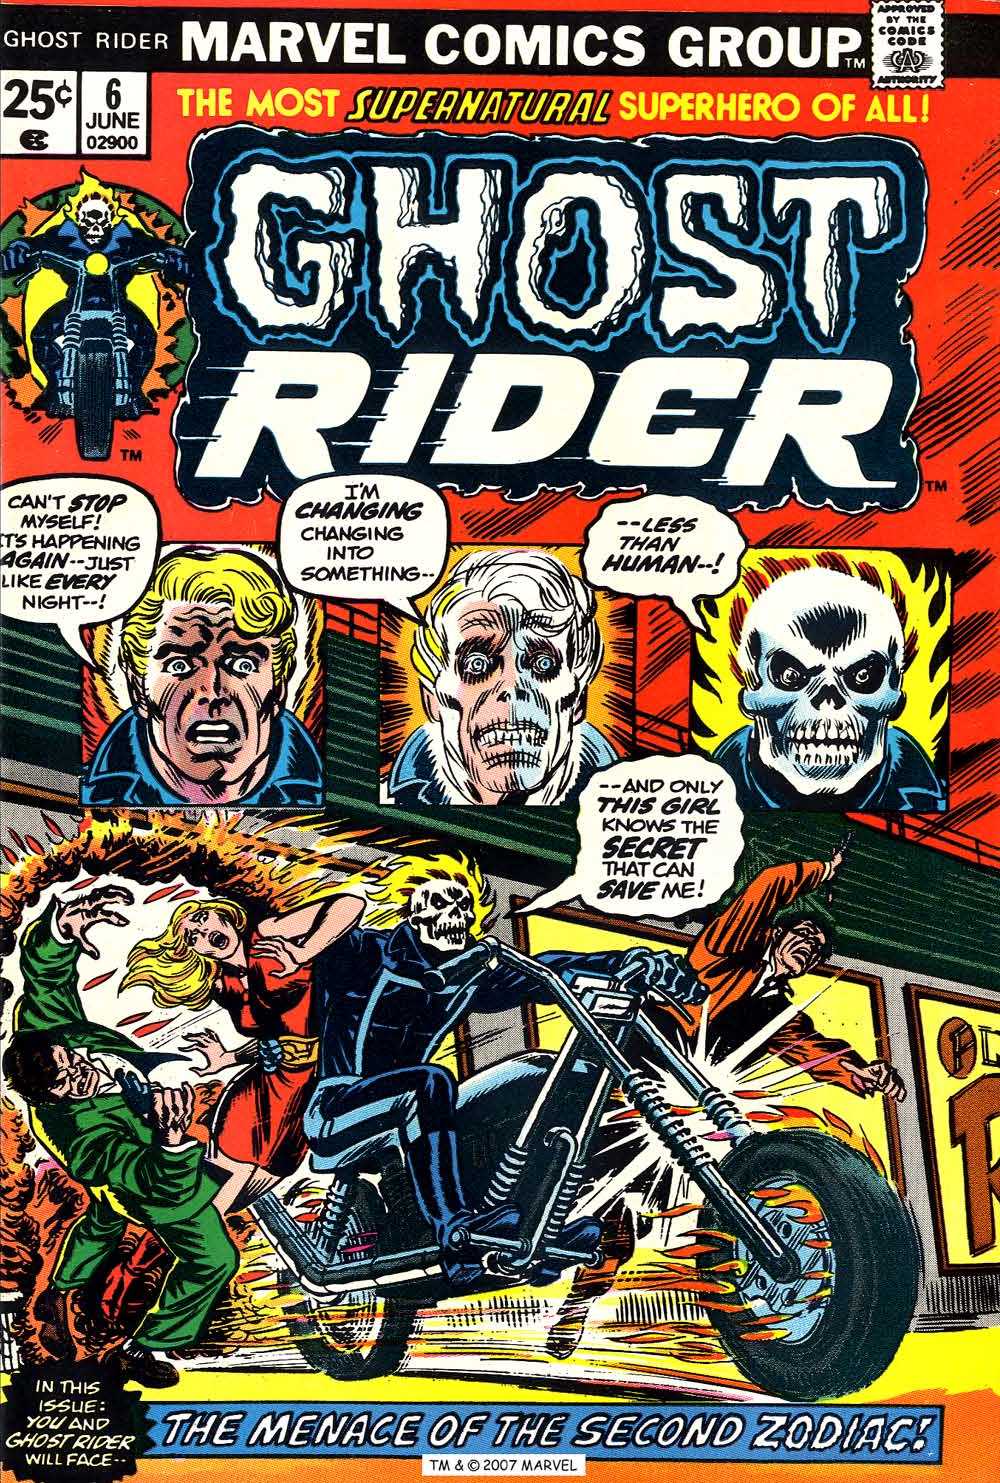 Read online Ghost Rider (1973) comic -  Issue #6 - 1